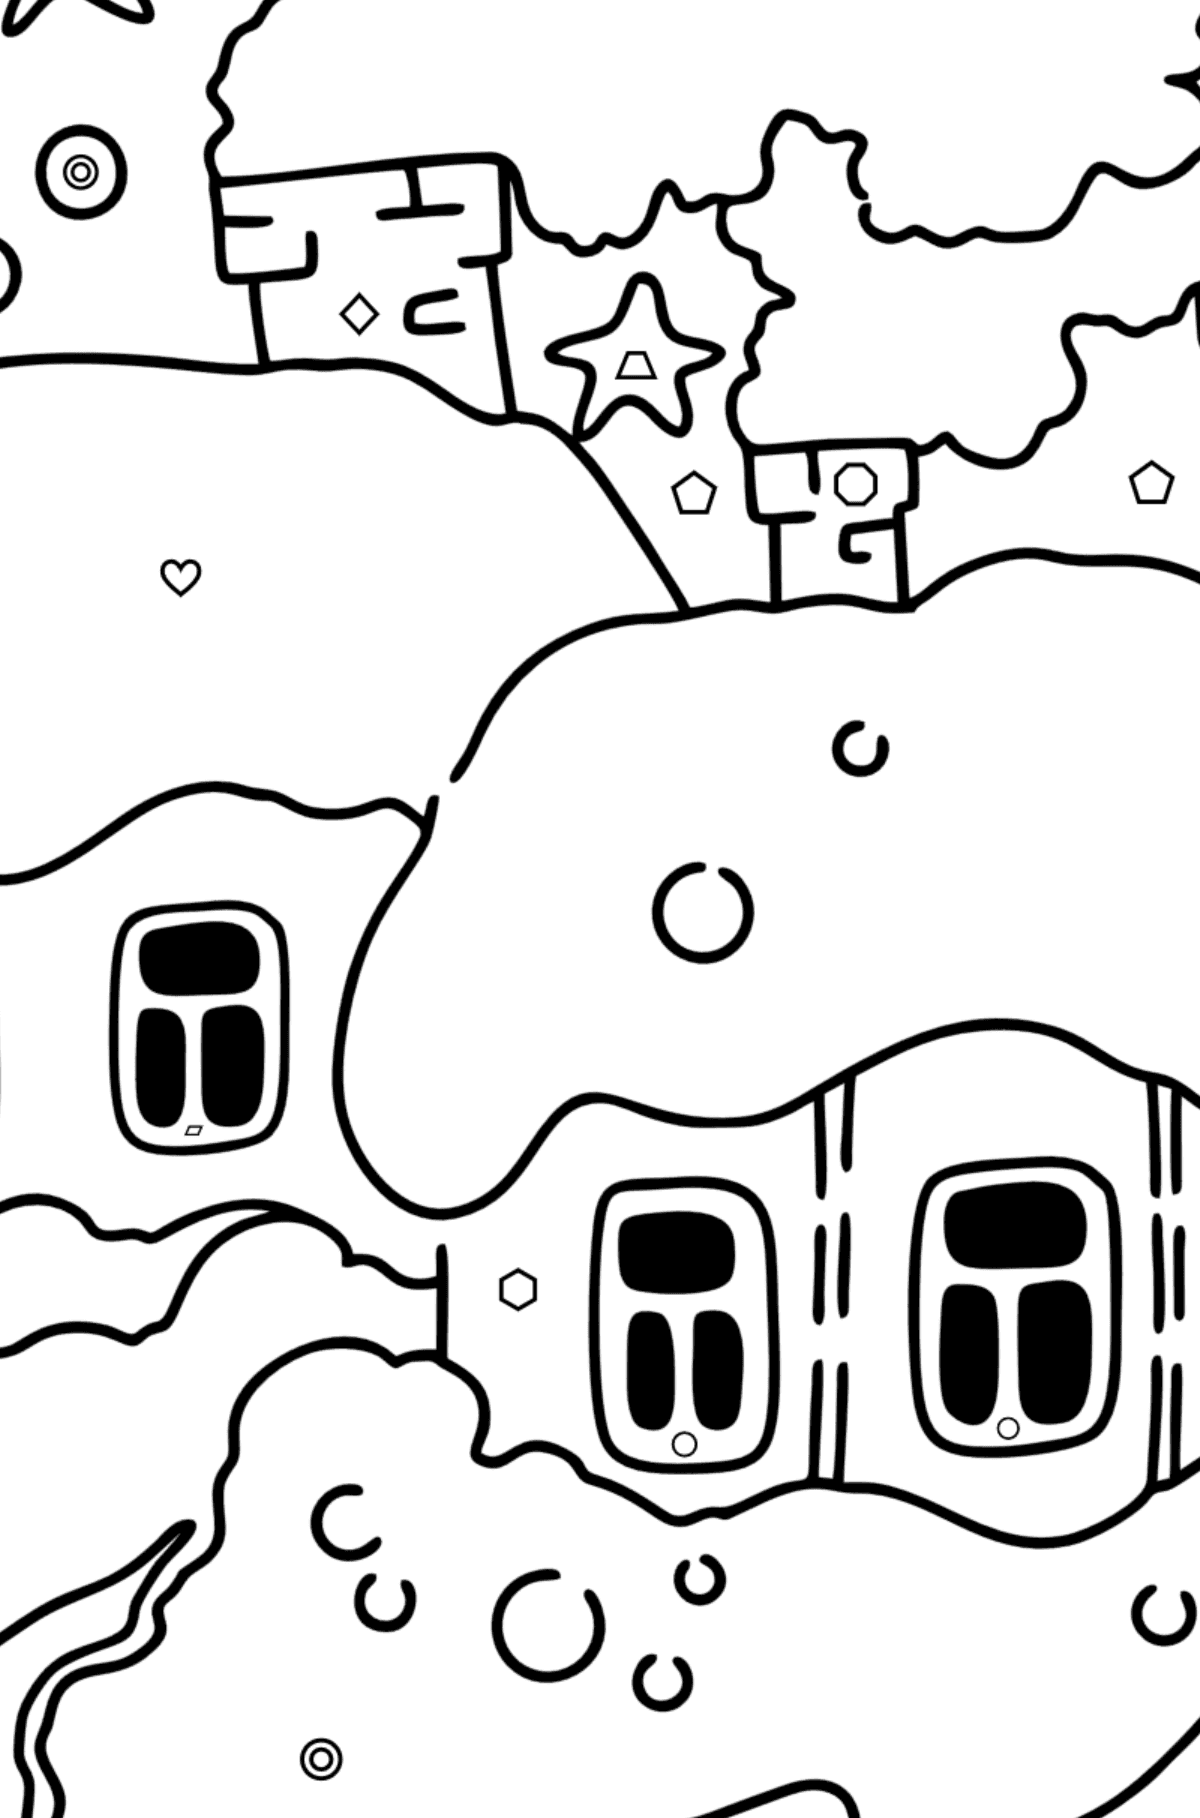 Coloring page - Winter Night - Coloring by Geometric Shapes for Kids